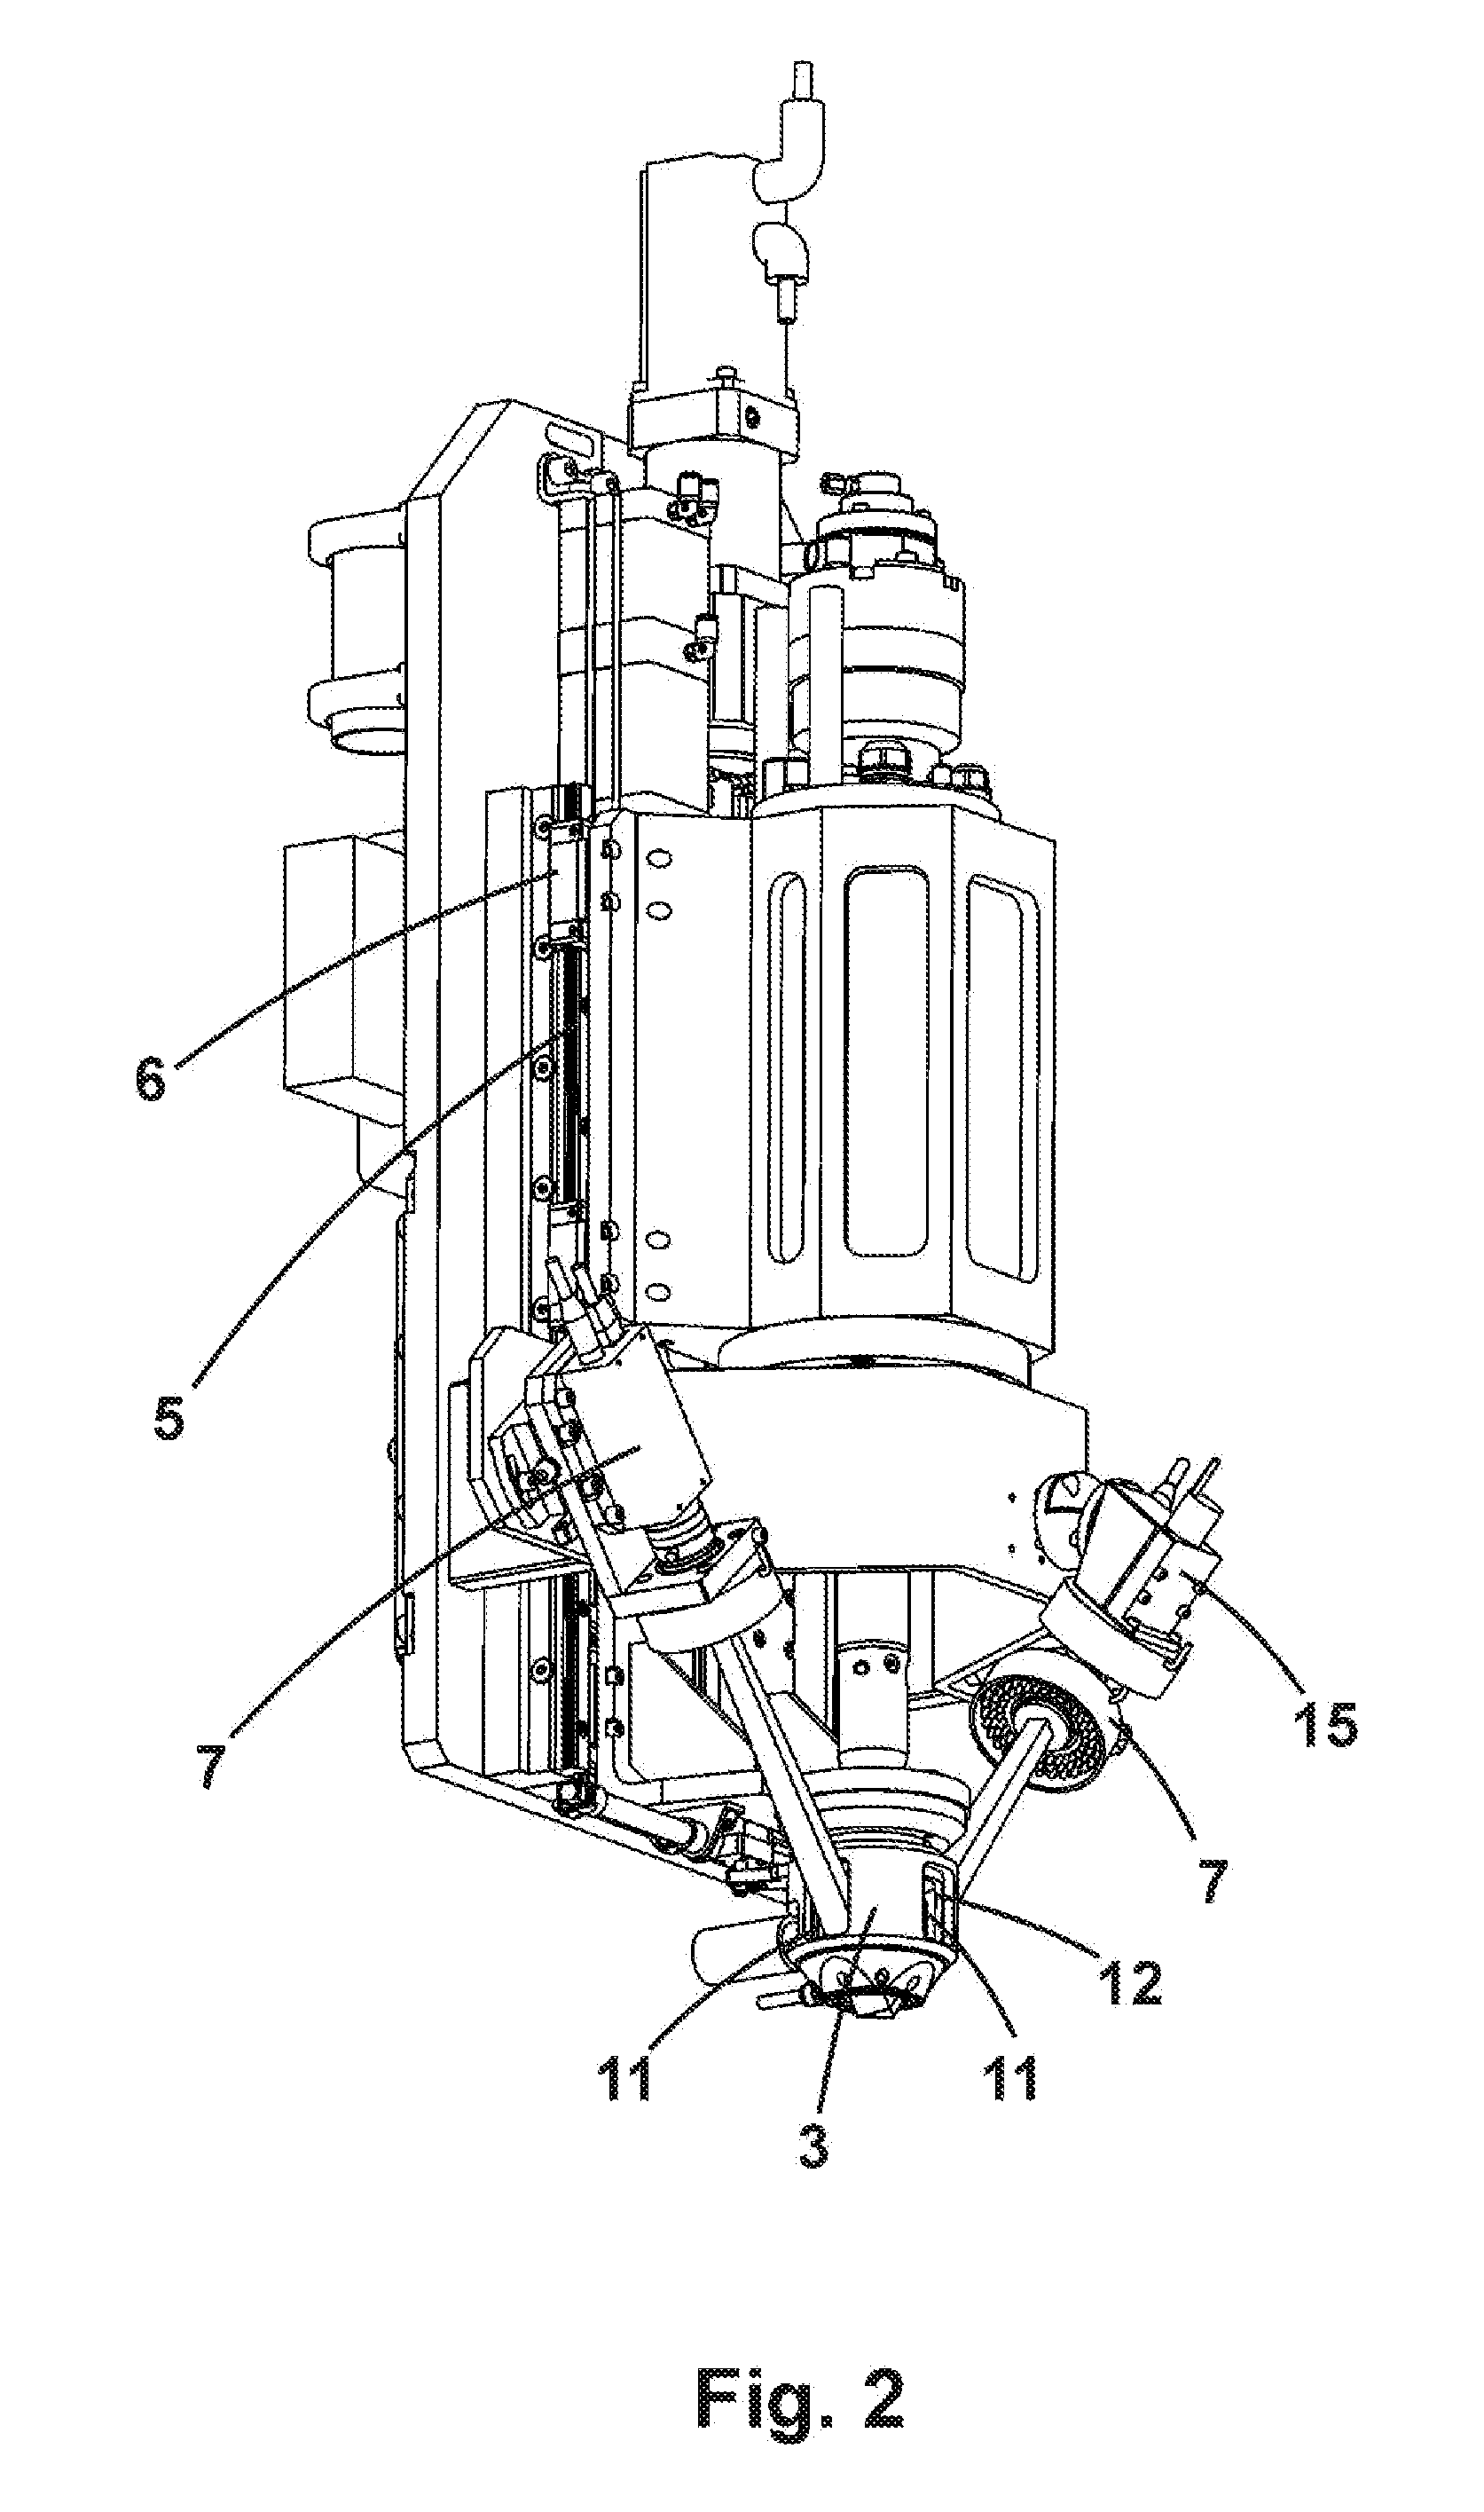 Head and automated mechanized method with vision